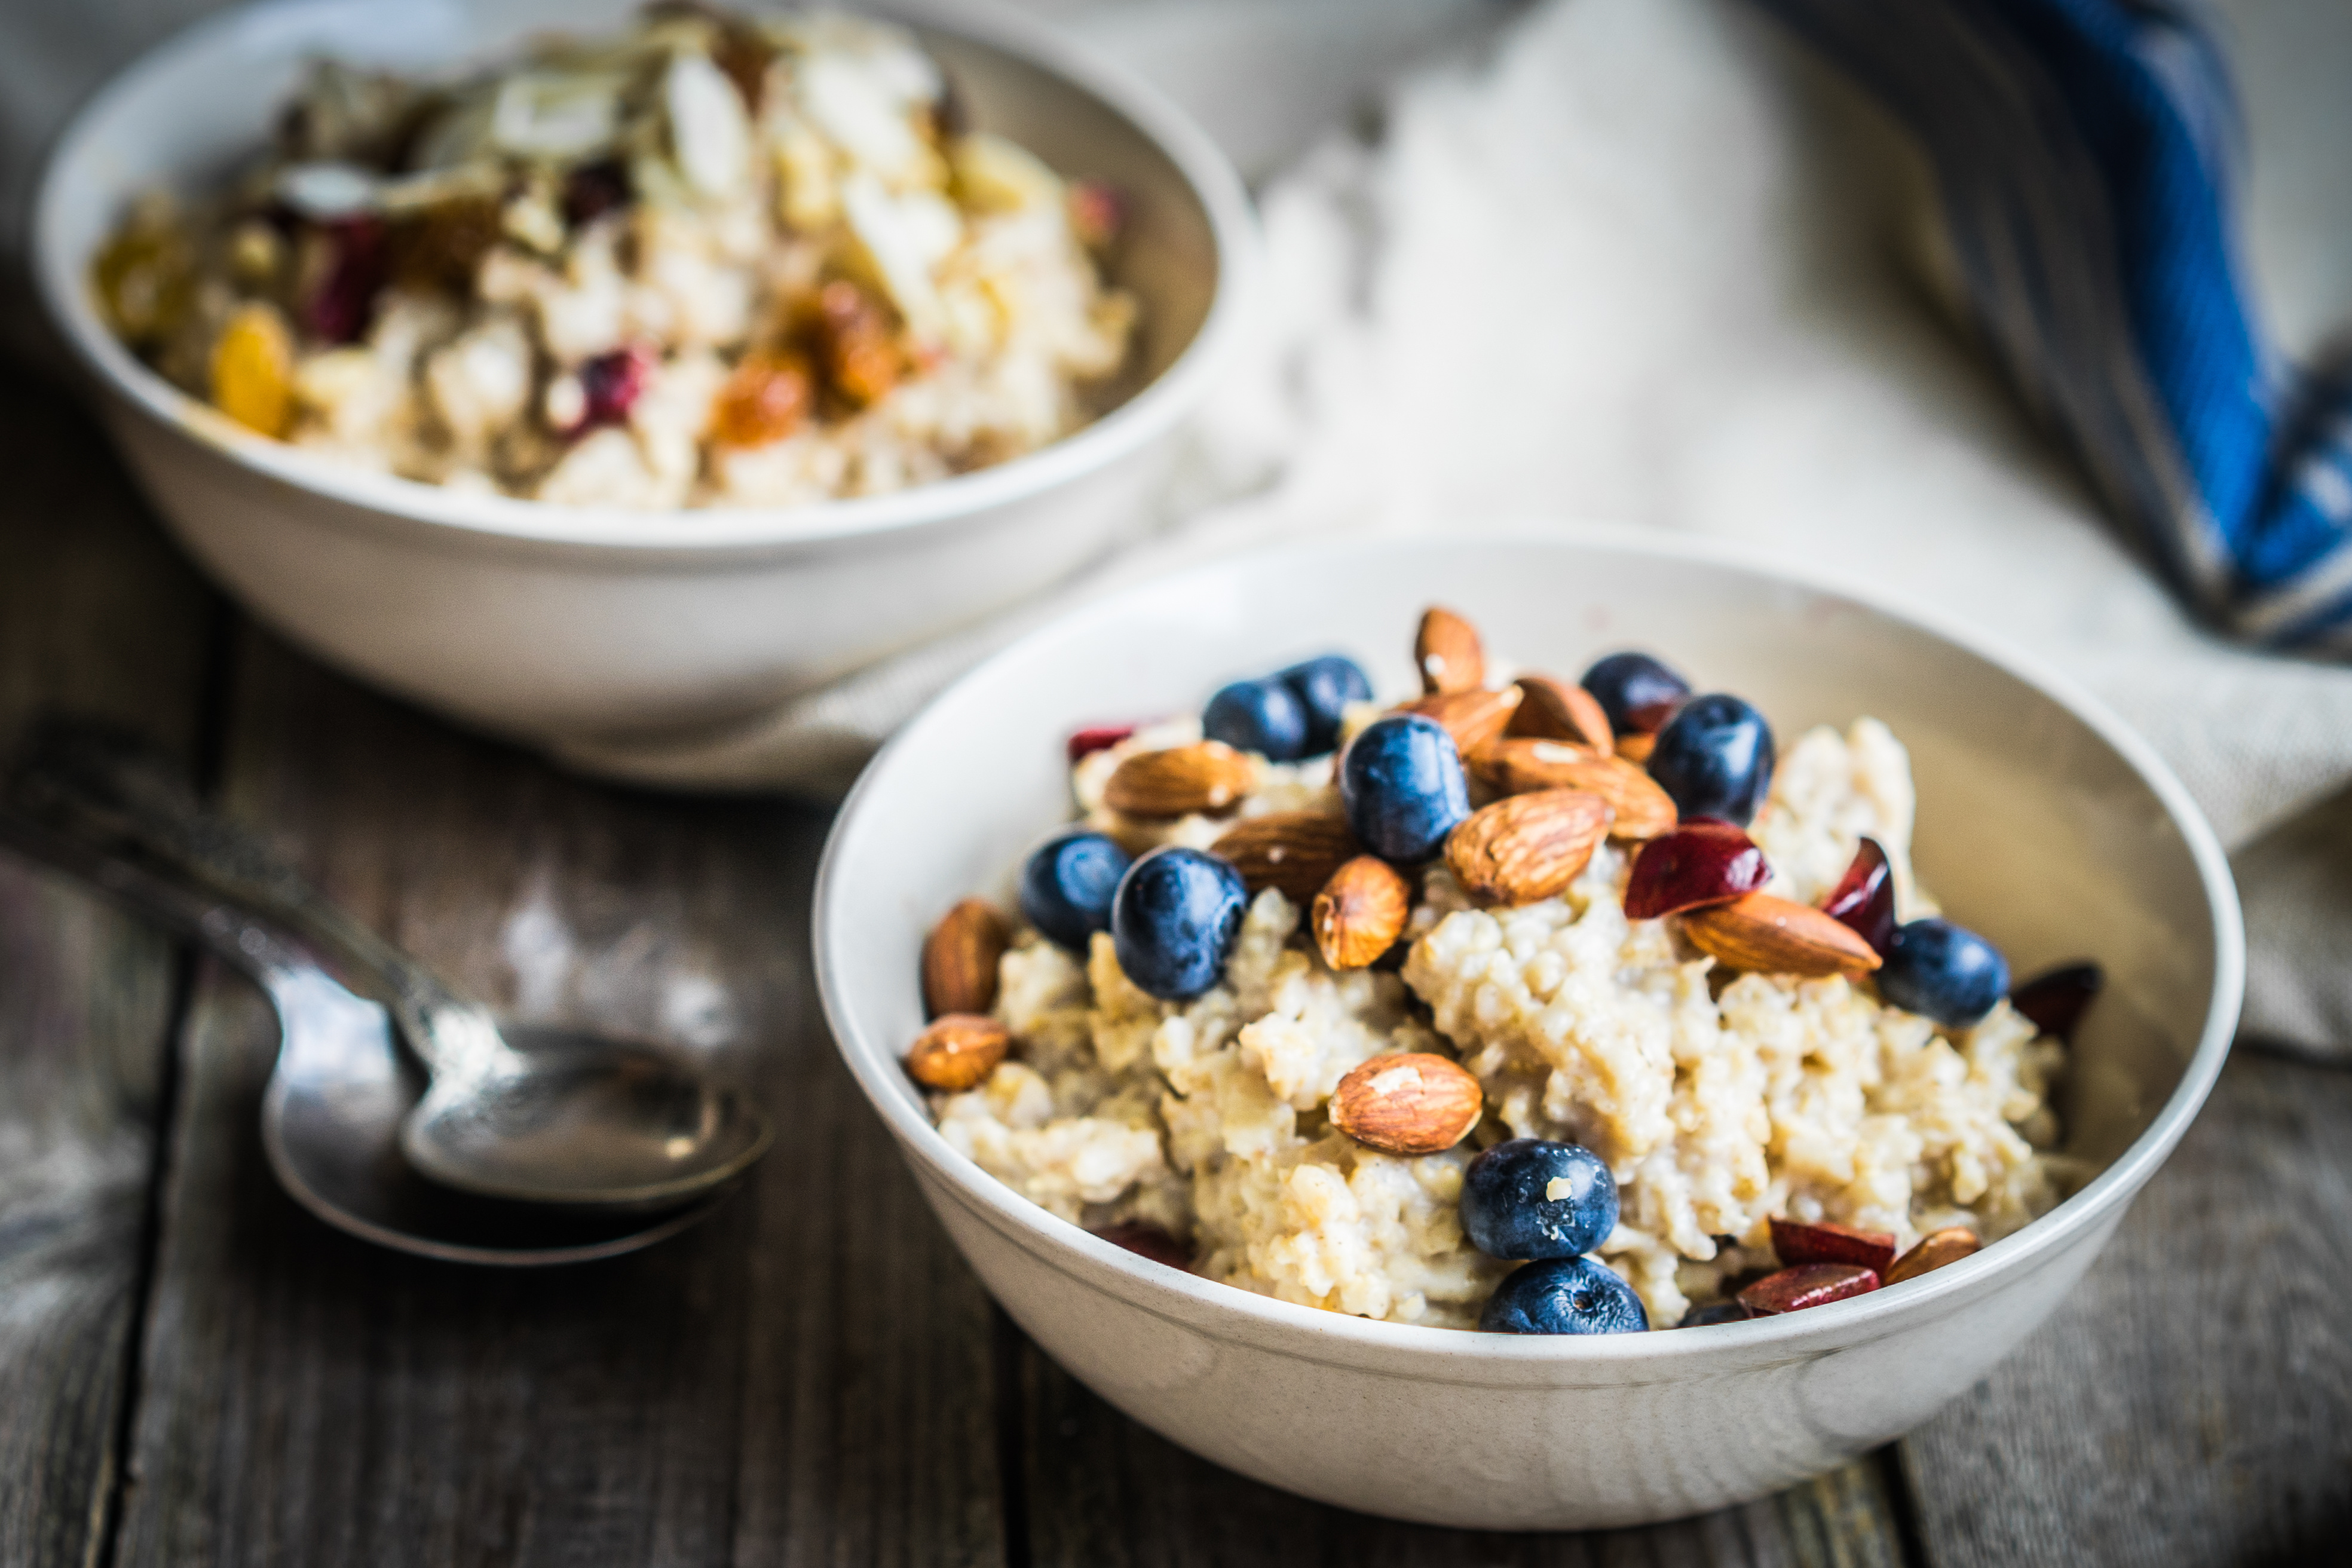 Oatmeal with berries and nuts